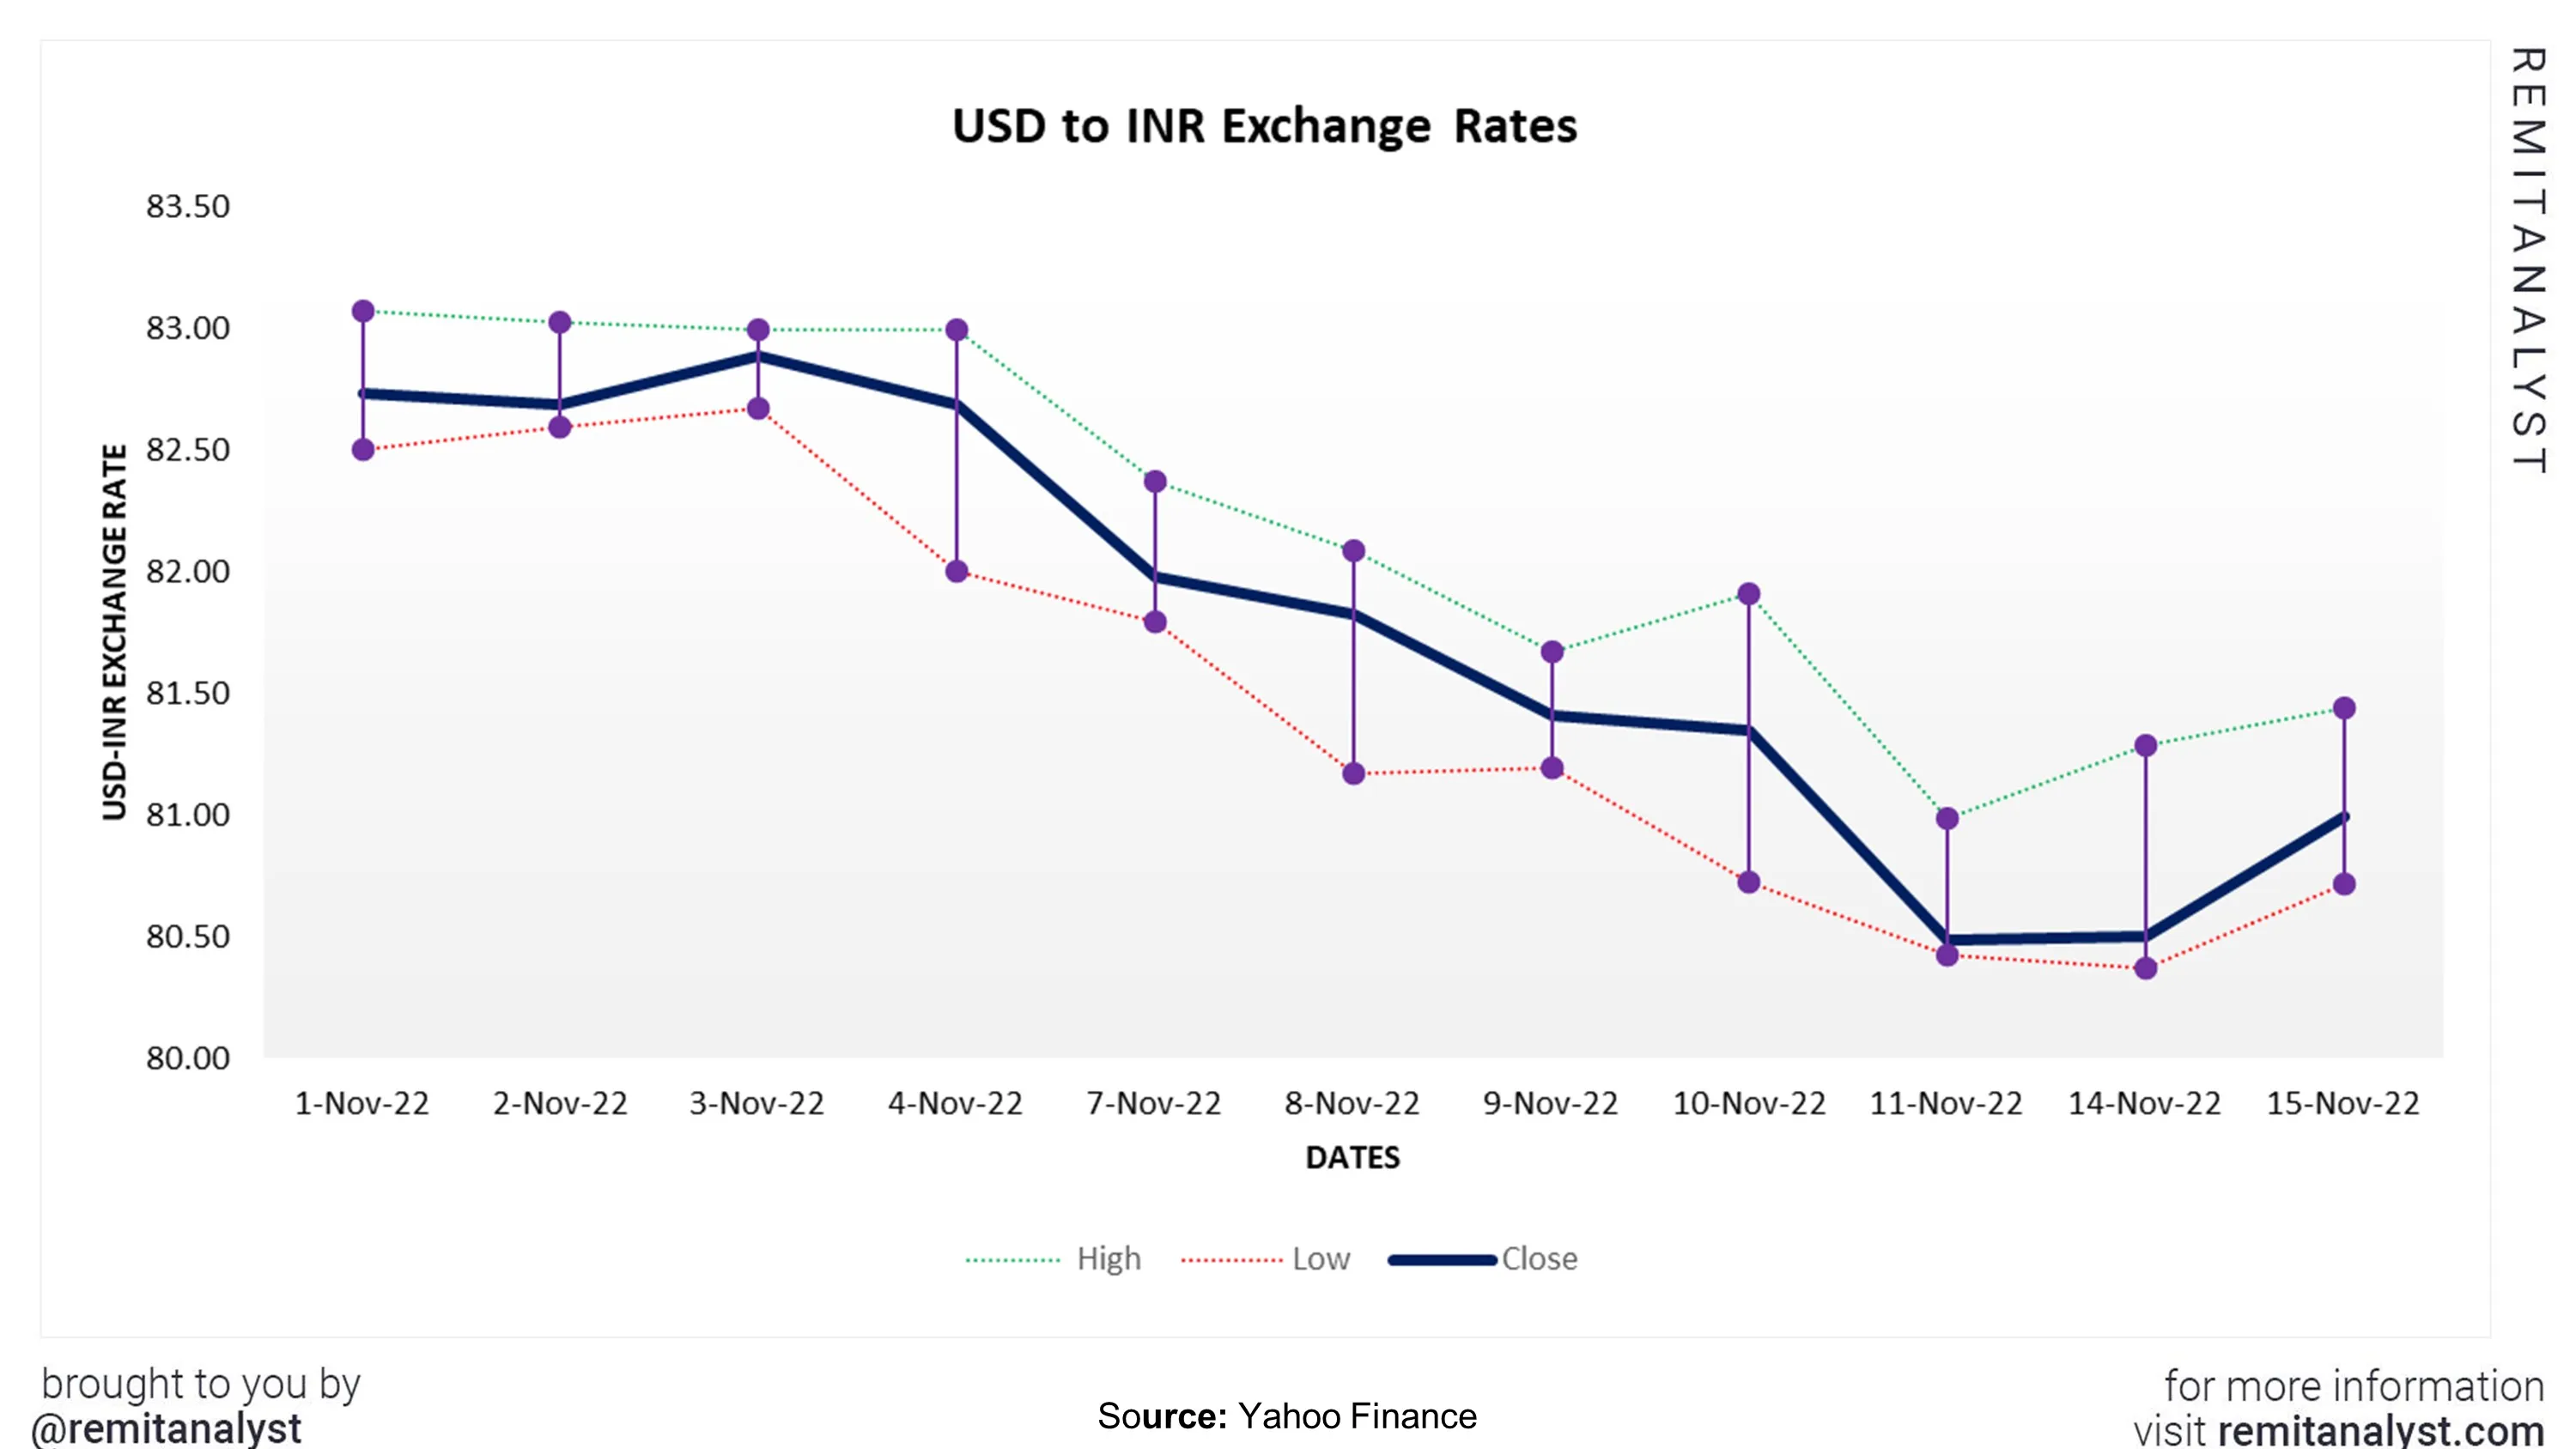 usd-to-inr-exchange-rate-from-1-nov-2022-to-15-nov-2022